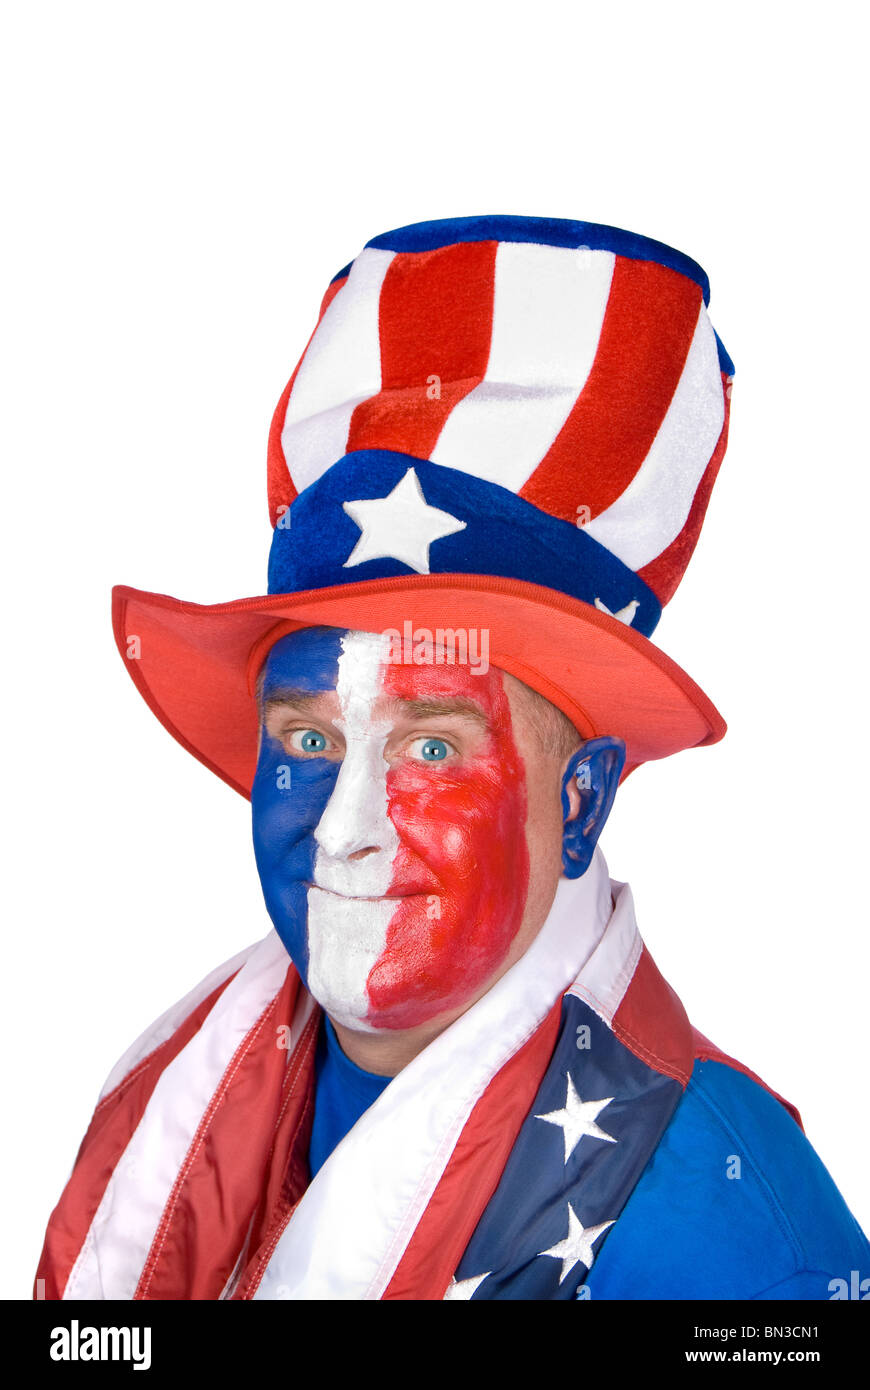 A patriotic man wearing red, white and blue face paint and color ful hat in celebration of the Fourth of July. Stock Photo